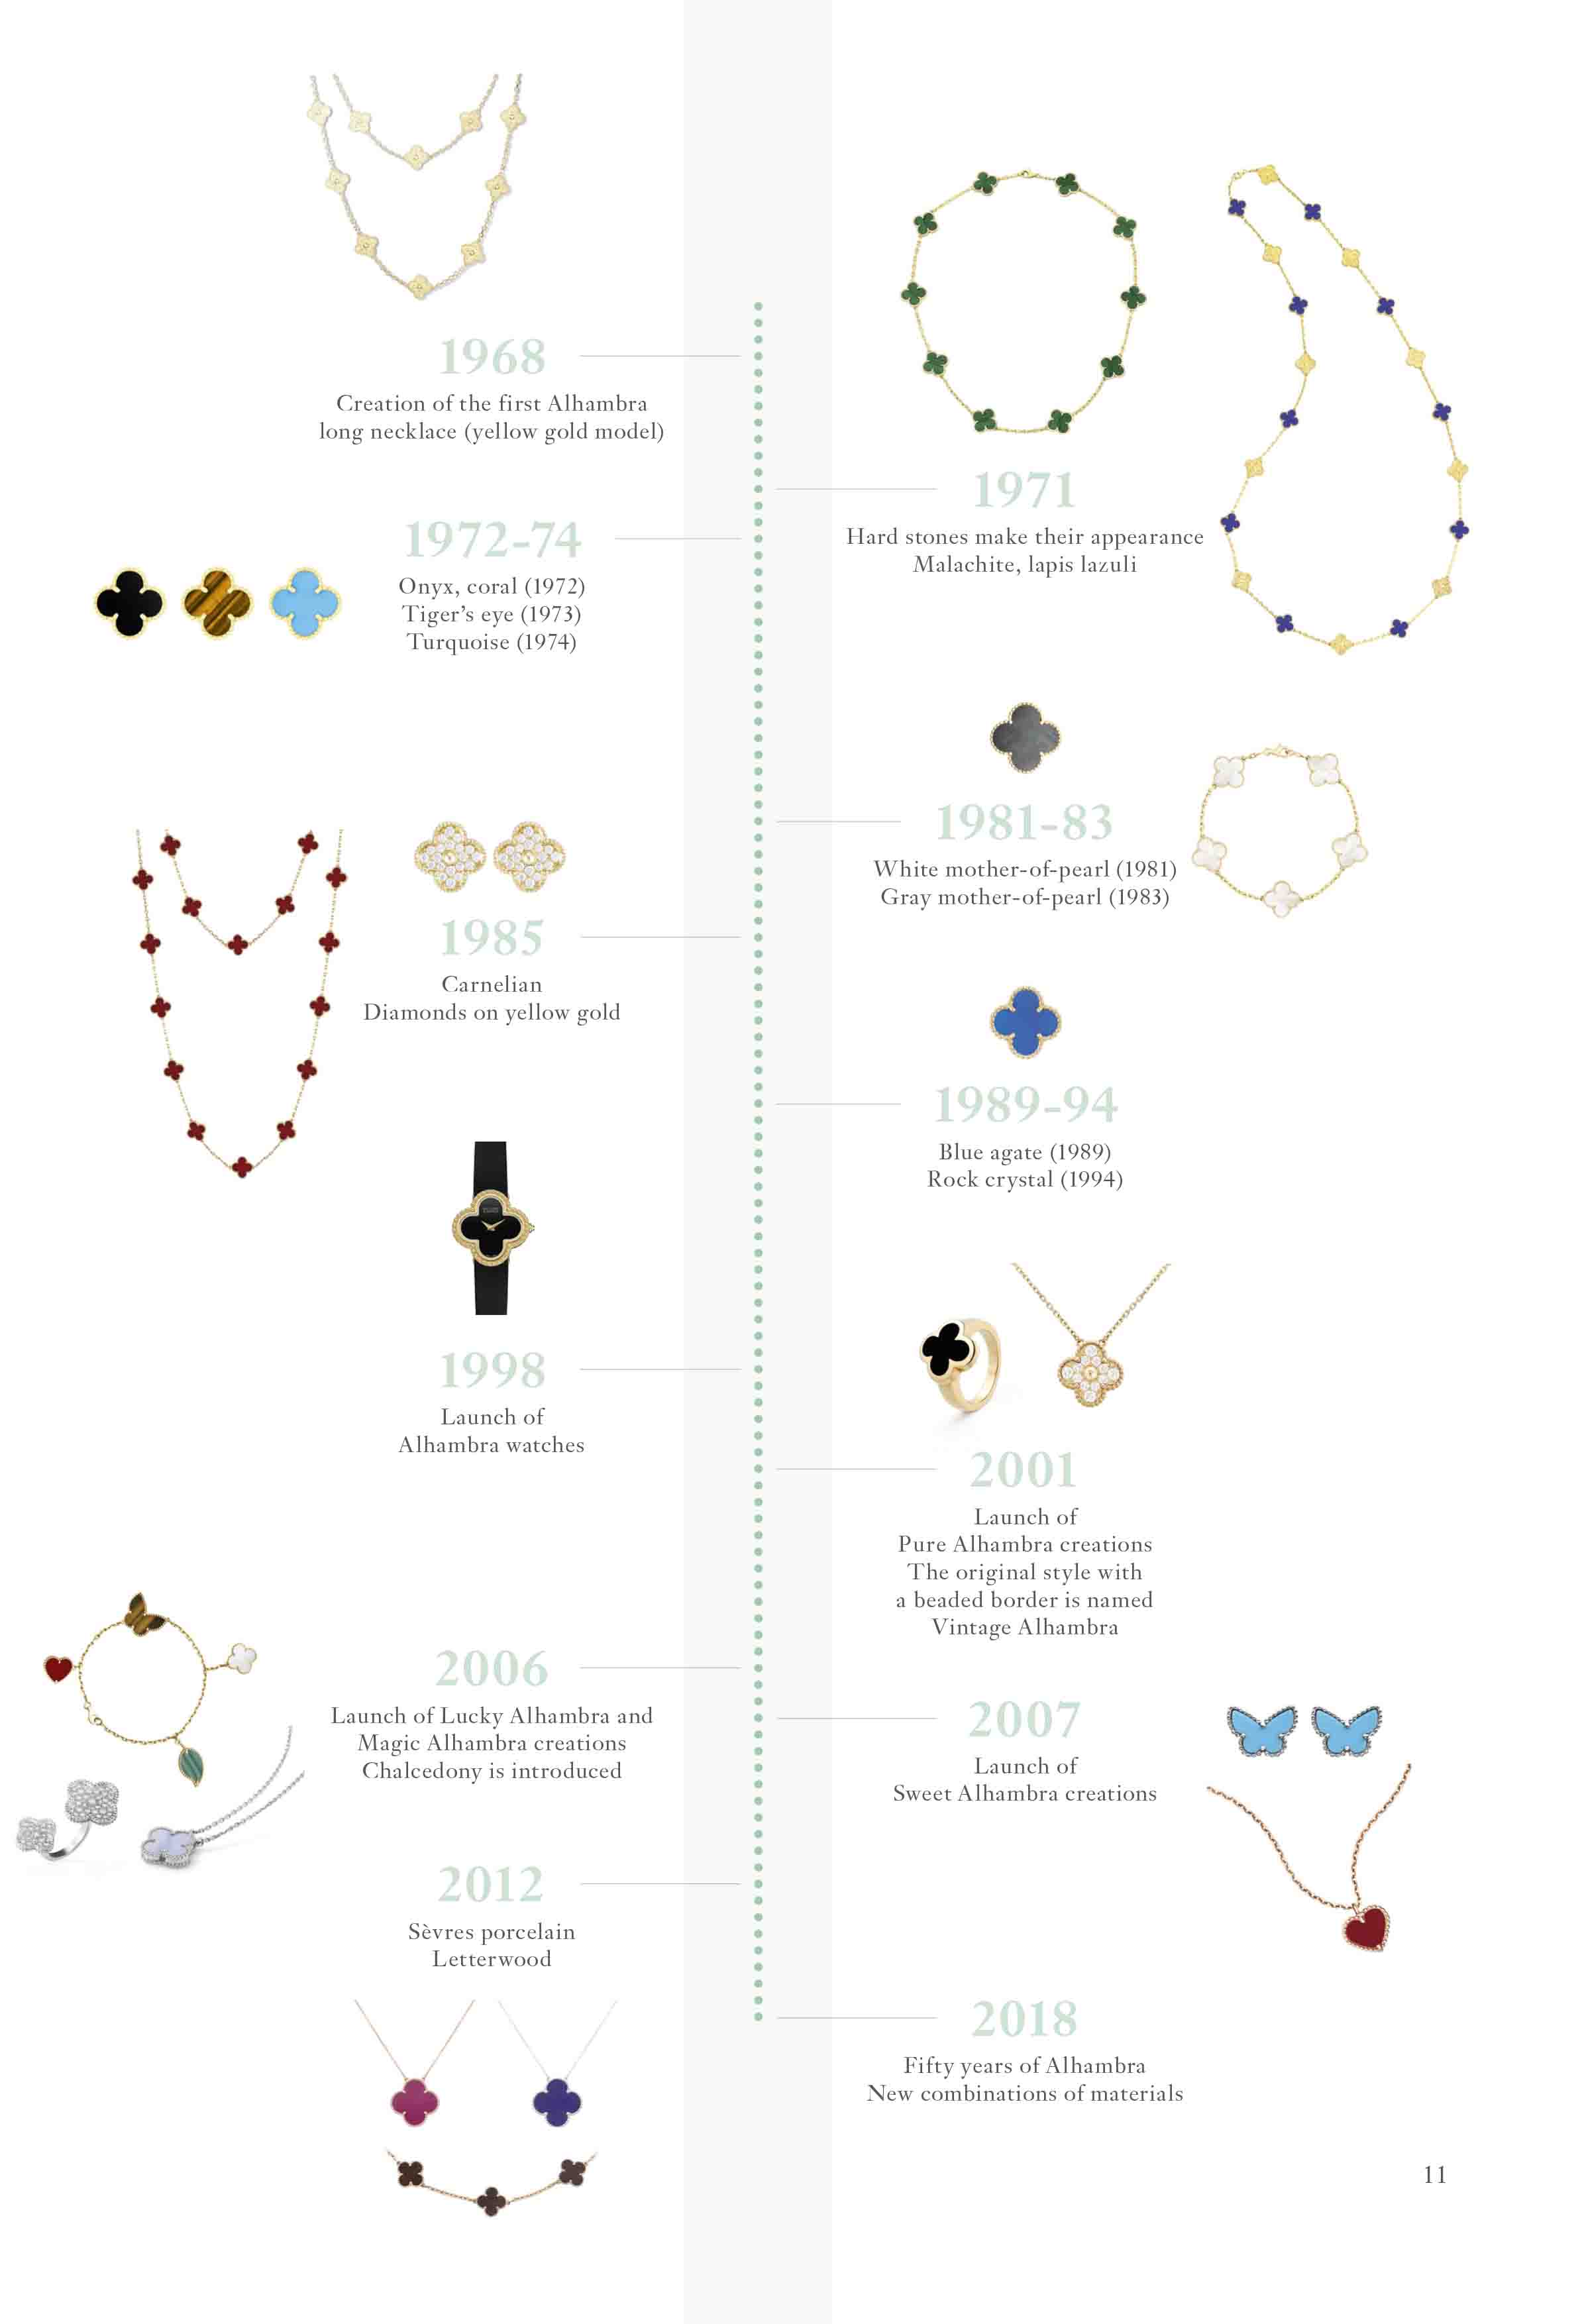 Van Cleef & Arpels enriches the Alhambra collection with classic